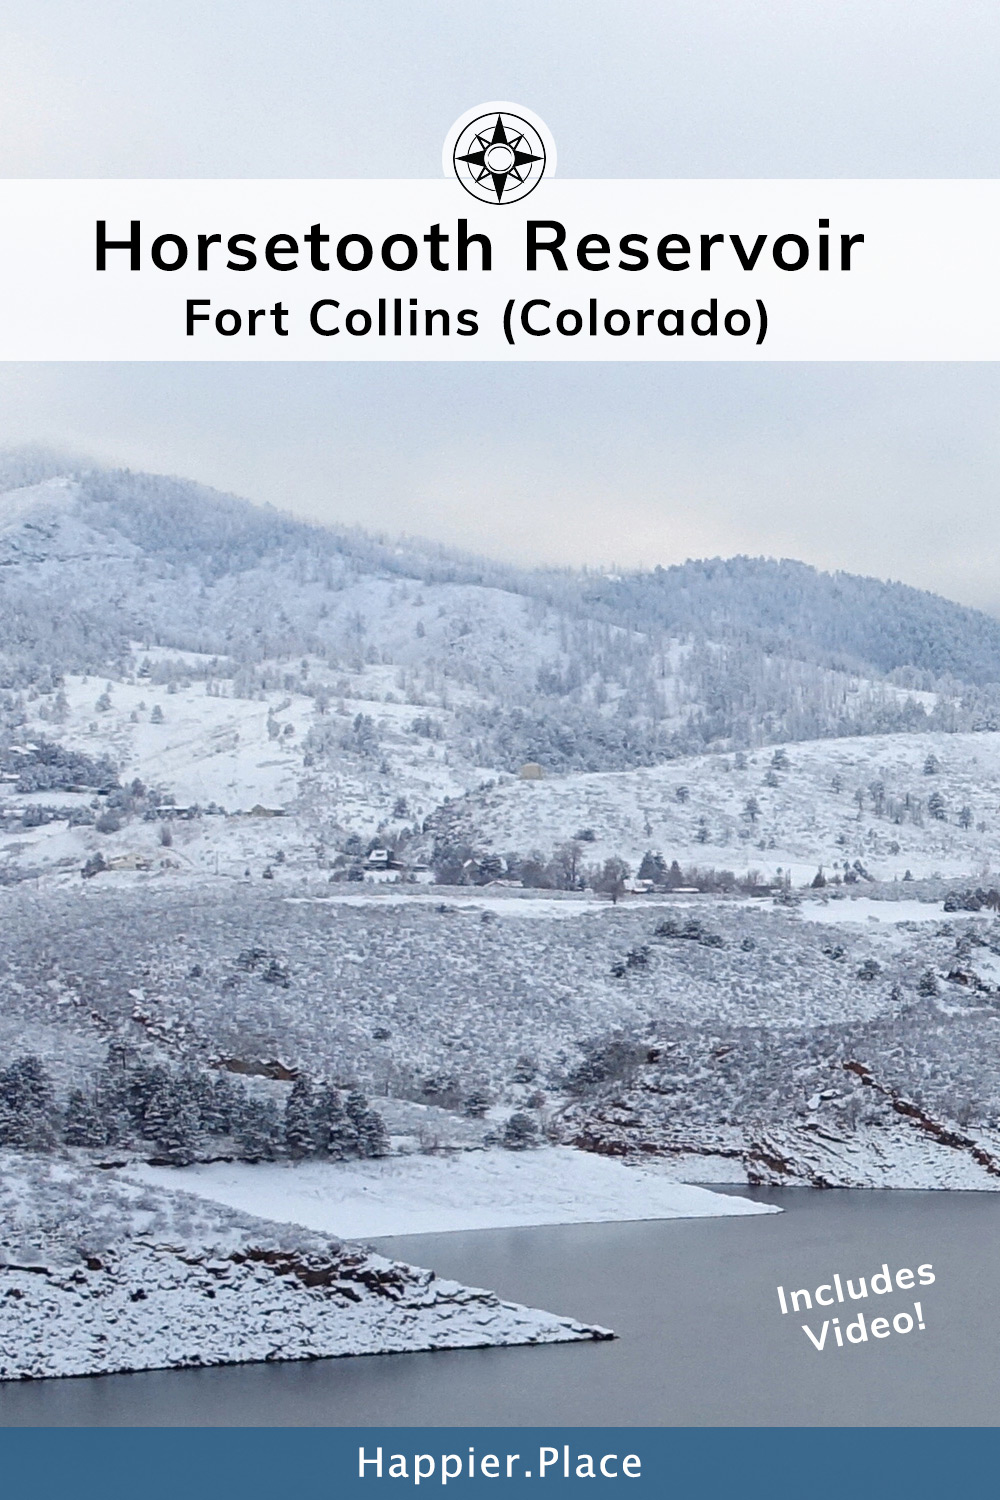 Horsetooth Reservoir in Fort Collins Colorado during the winter. Happier Place